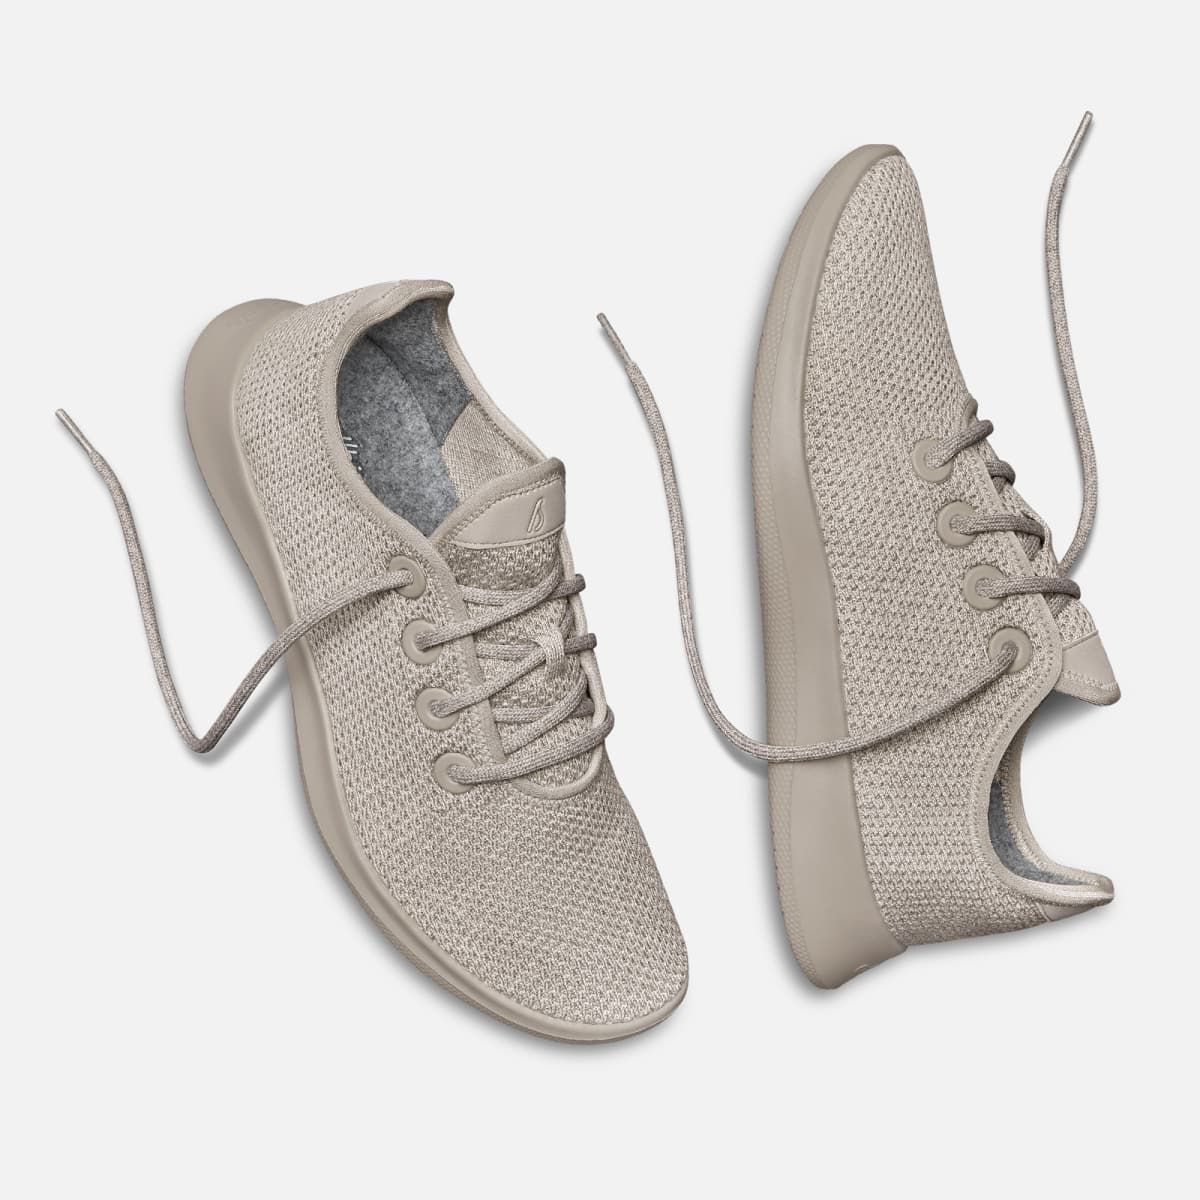 Allbirds in Limestone | Runners shoes, White tennis shoes, How to make ...